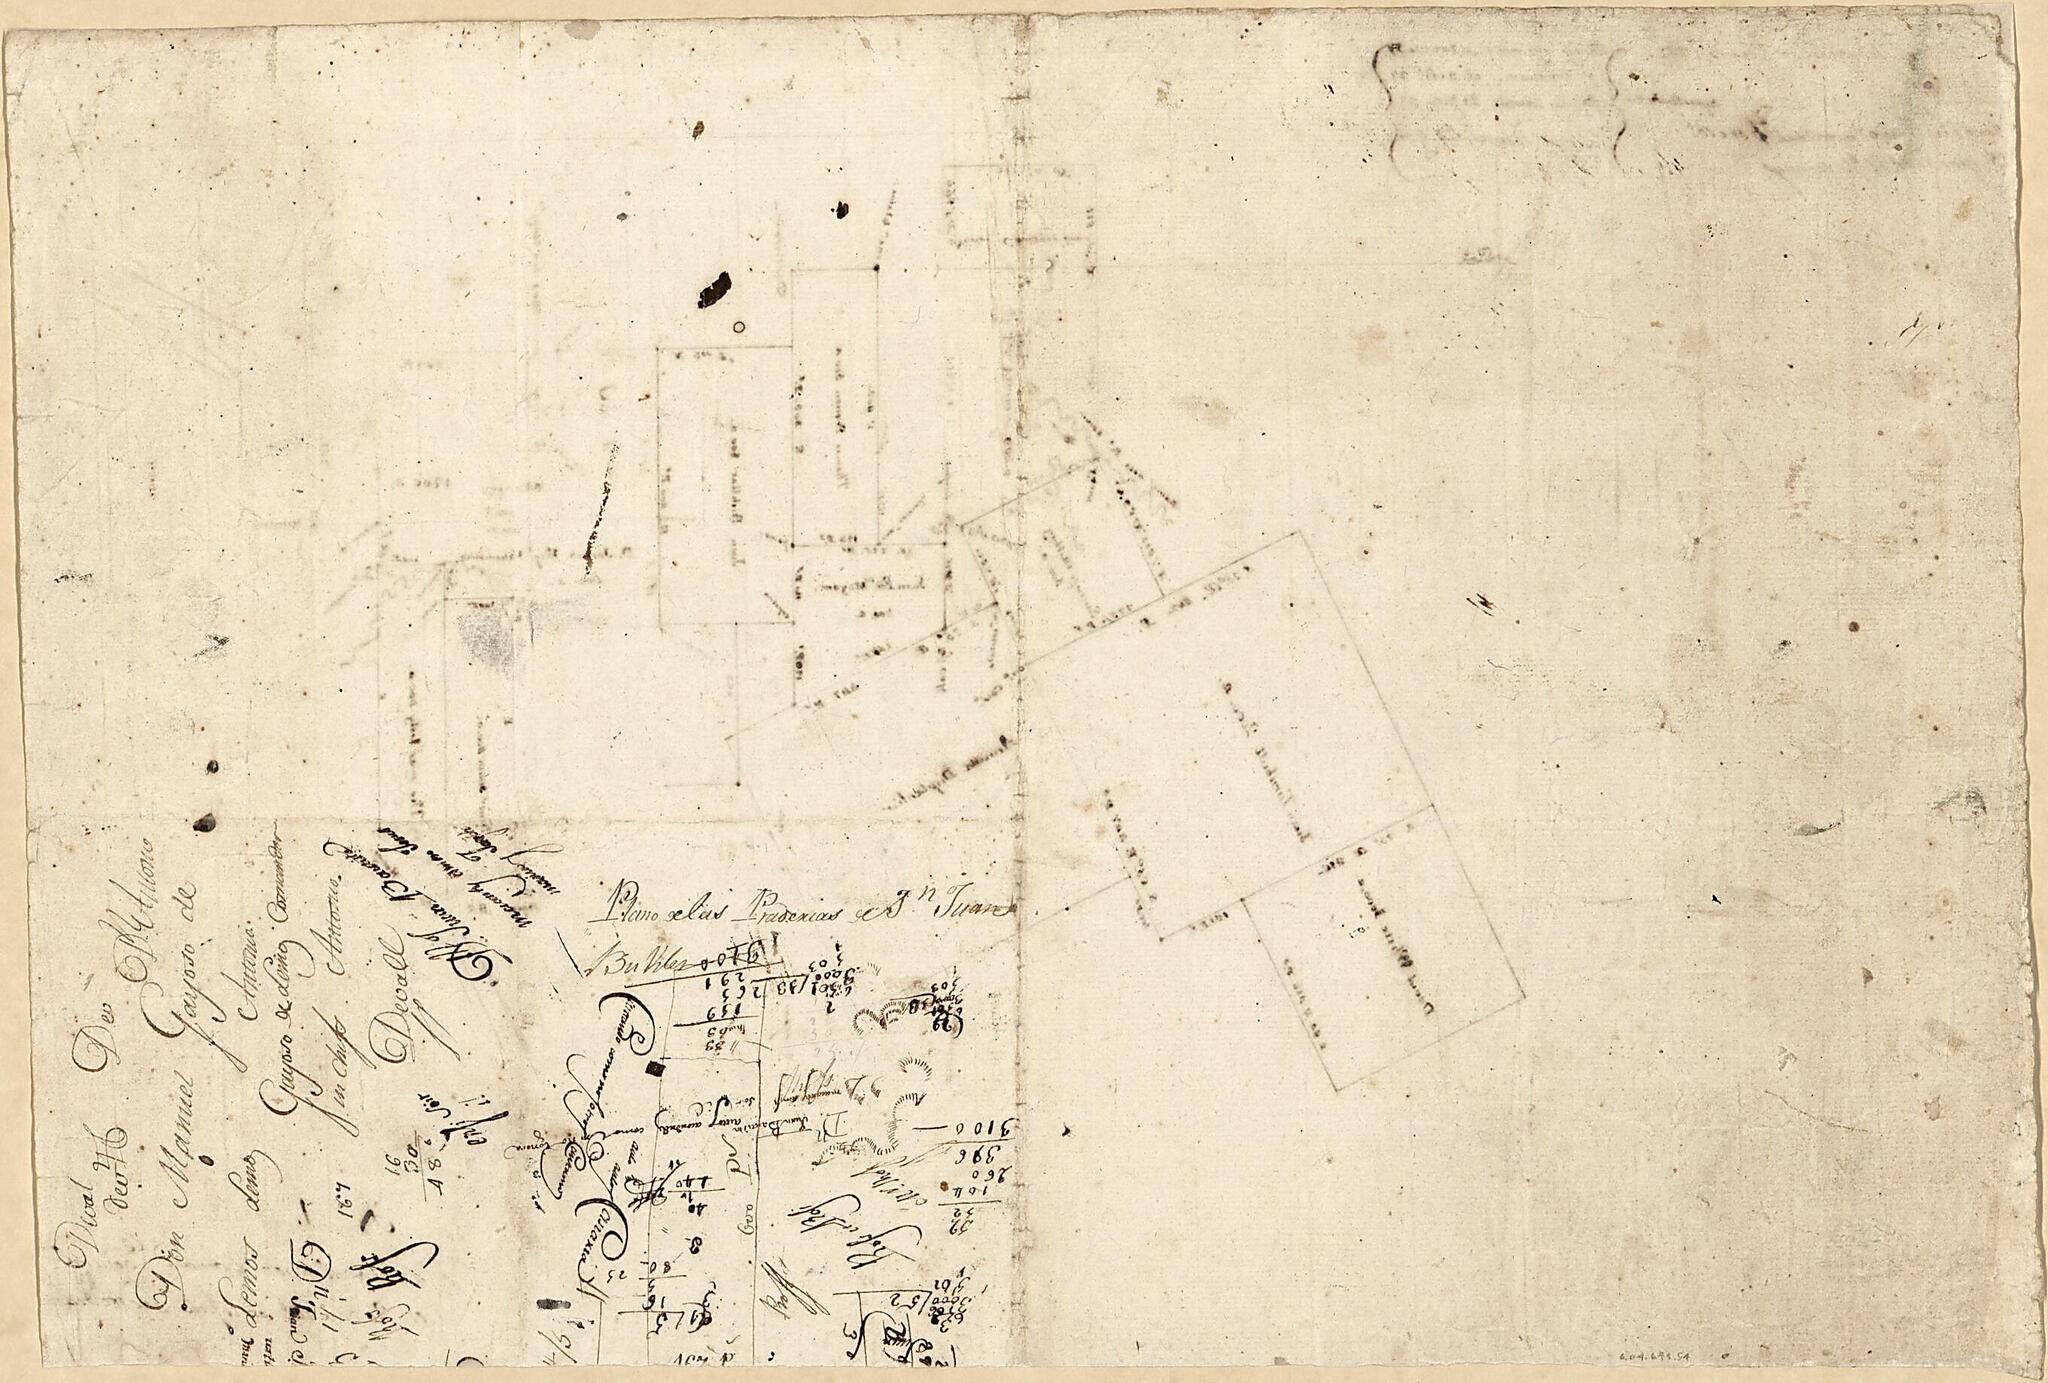 This old map of Cadastral Map of a Portion of Feliciana District, Spanish West Florida from 1805 was created by Vicente Sebastián Pintado in 1805